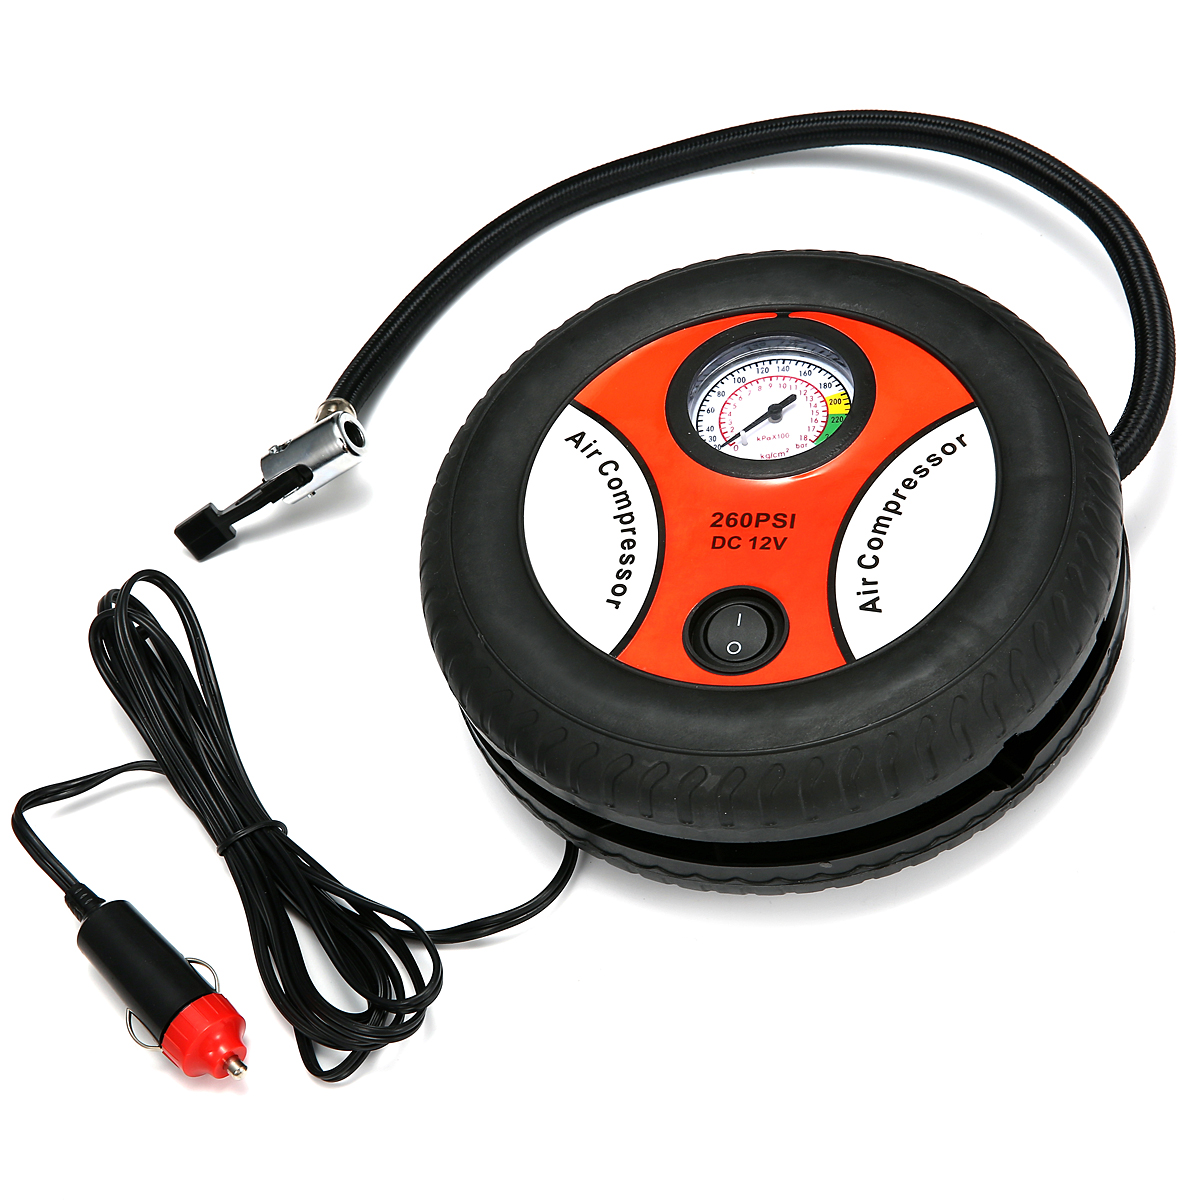 AUGIENB-DC-12V-260PSI-Tyre-Inflator-Vehicle-Car-Air-Pump-Inflatable-Compressor-Inflator-1458312-4